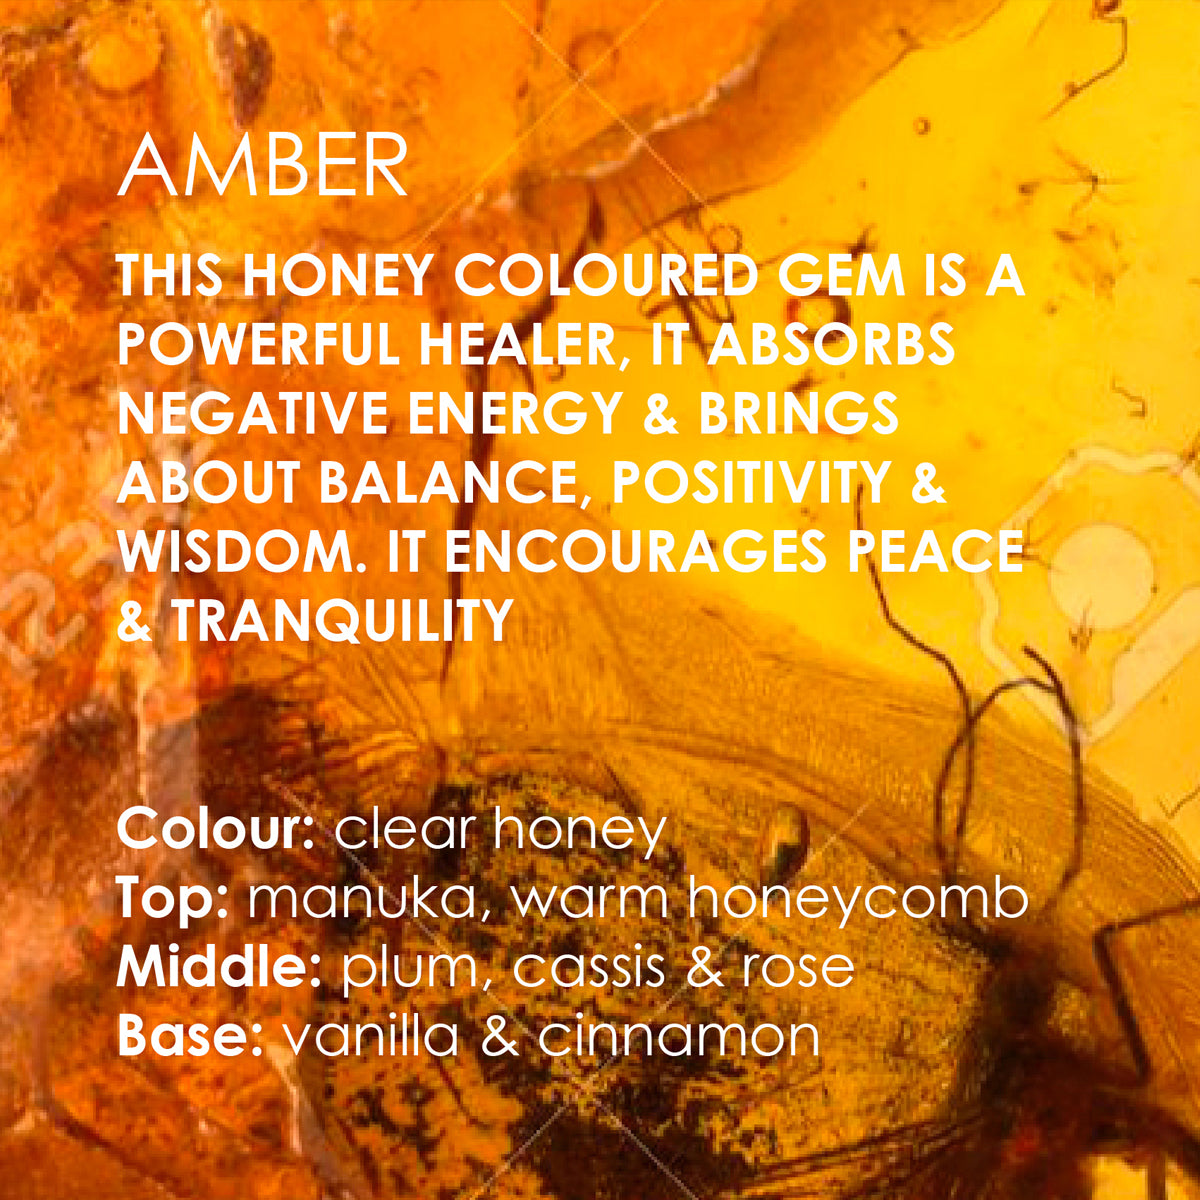  Text on honeycomb background describing Amber as a honey-colored gem that is a powerful healer, absorbs negative energy, and brings balance, positivity, and wisdom. It promotes peace and tranquility. The color is clear honey with fragrance notes of manuka, warm honeycomb, plum, cassis, rose, vanilla, and cinnamon.